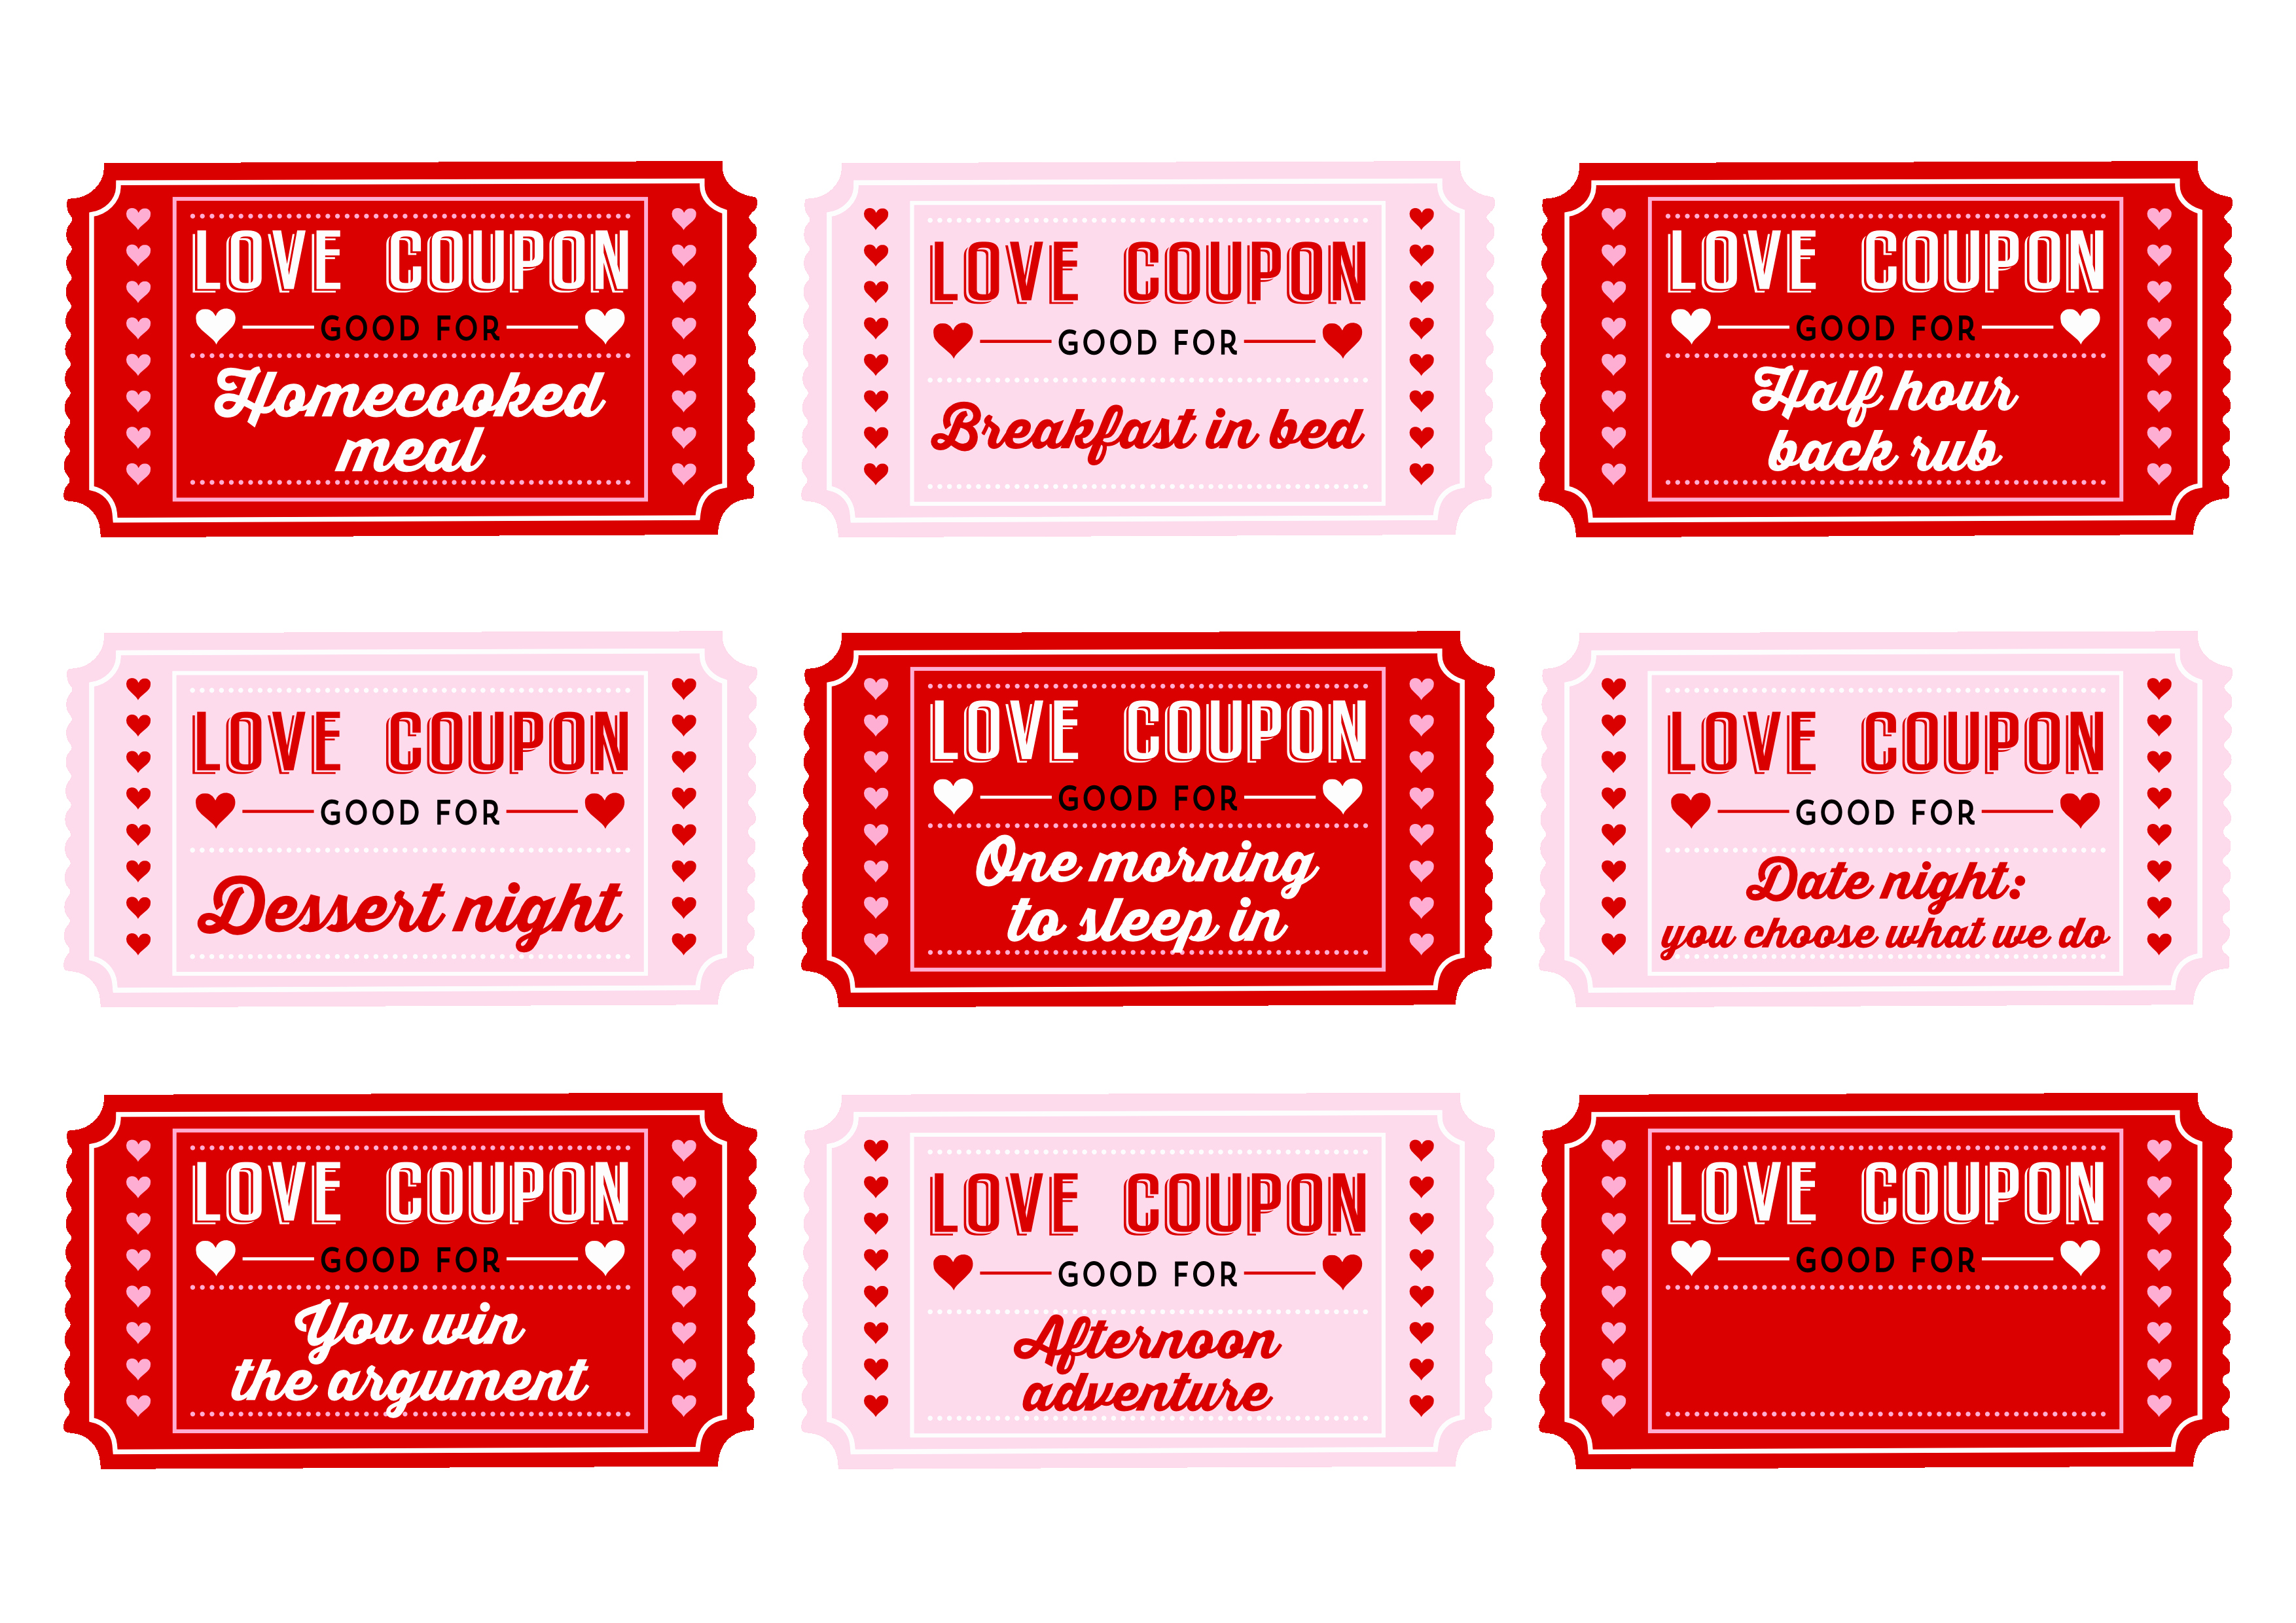 Valentine Day Coupon Template Lovely Free Printable Love Coupons for Couples On Valentine S Day